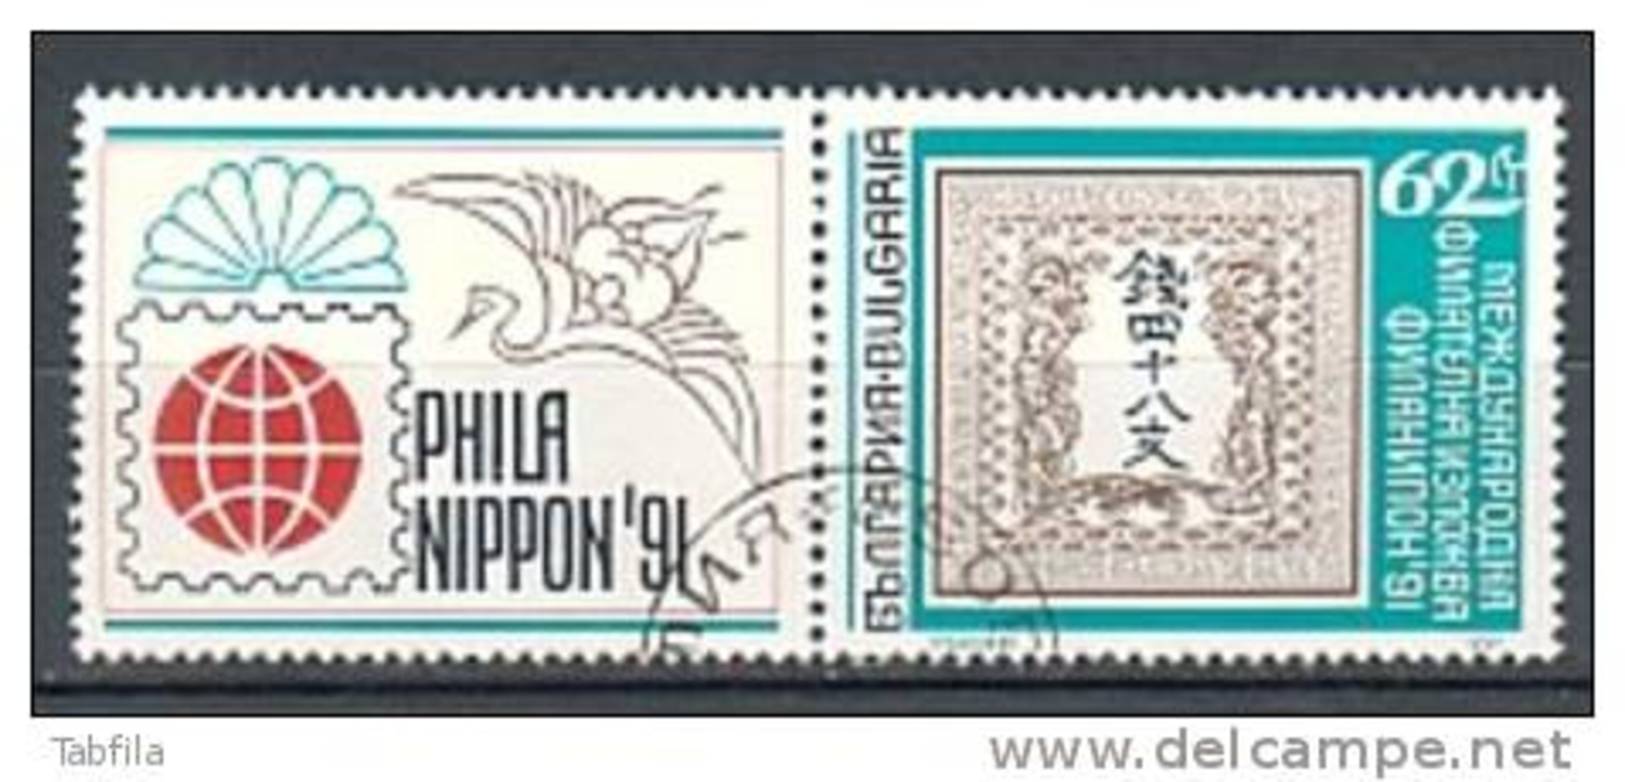 BULGARIA \ BULGARIE - 1991 - "PhilaNippon´91" Exposition  Int. De Philatelie A Tokio - 1v Obl. - Used Stamps